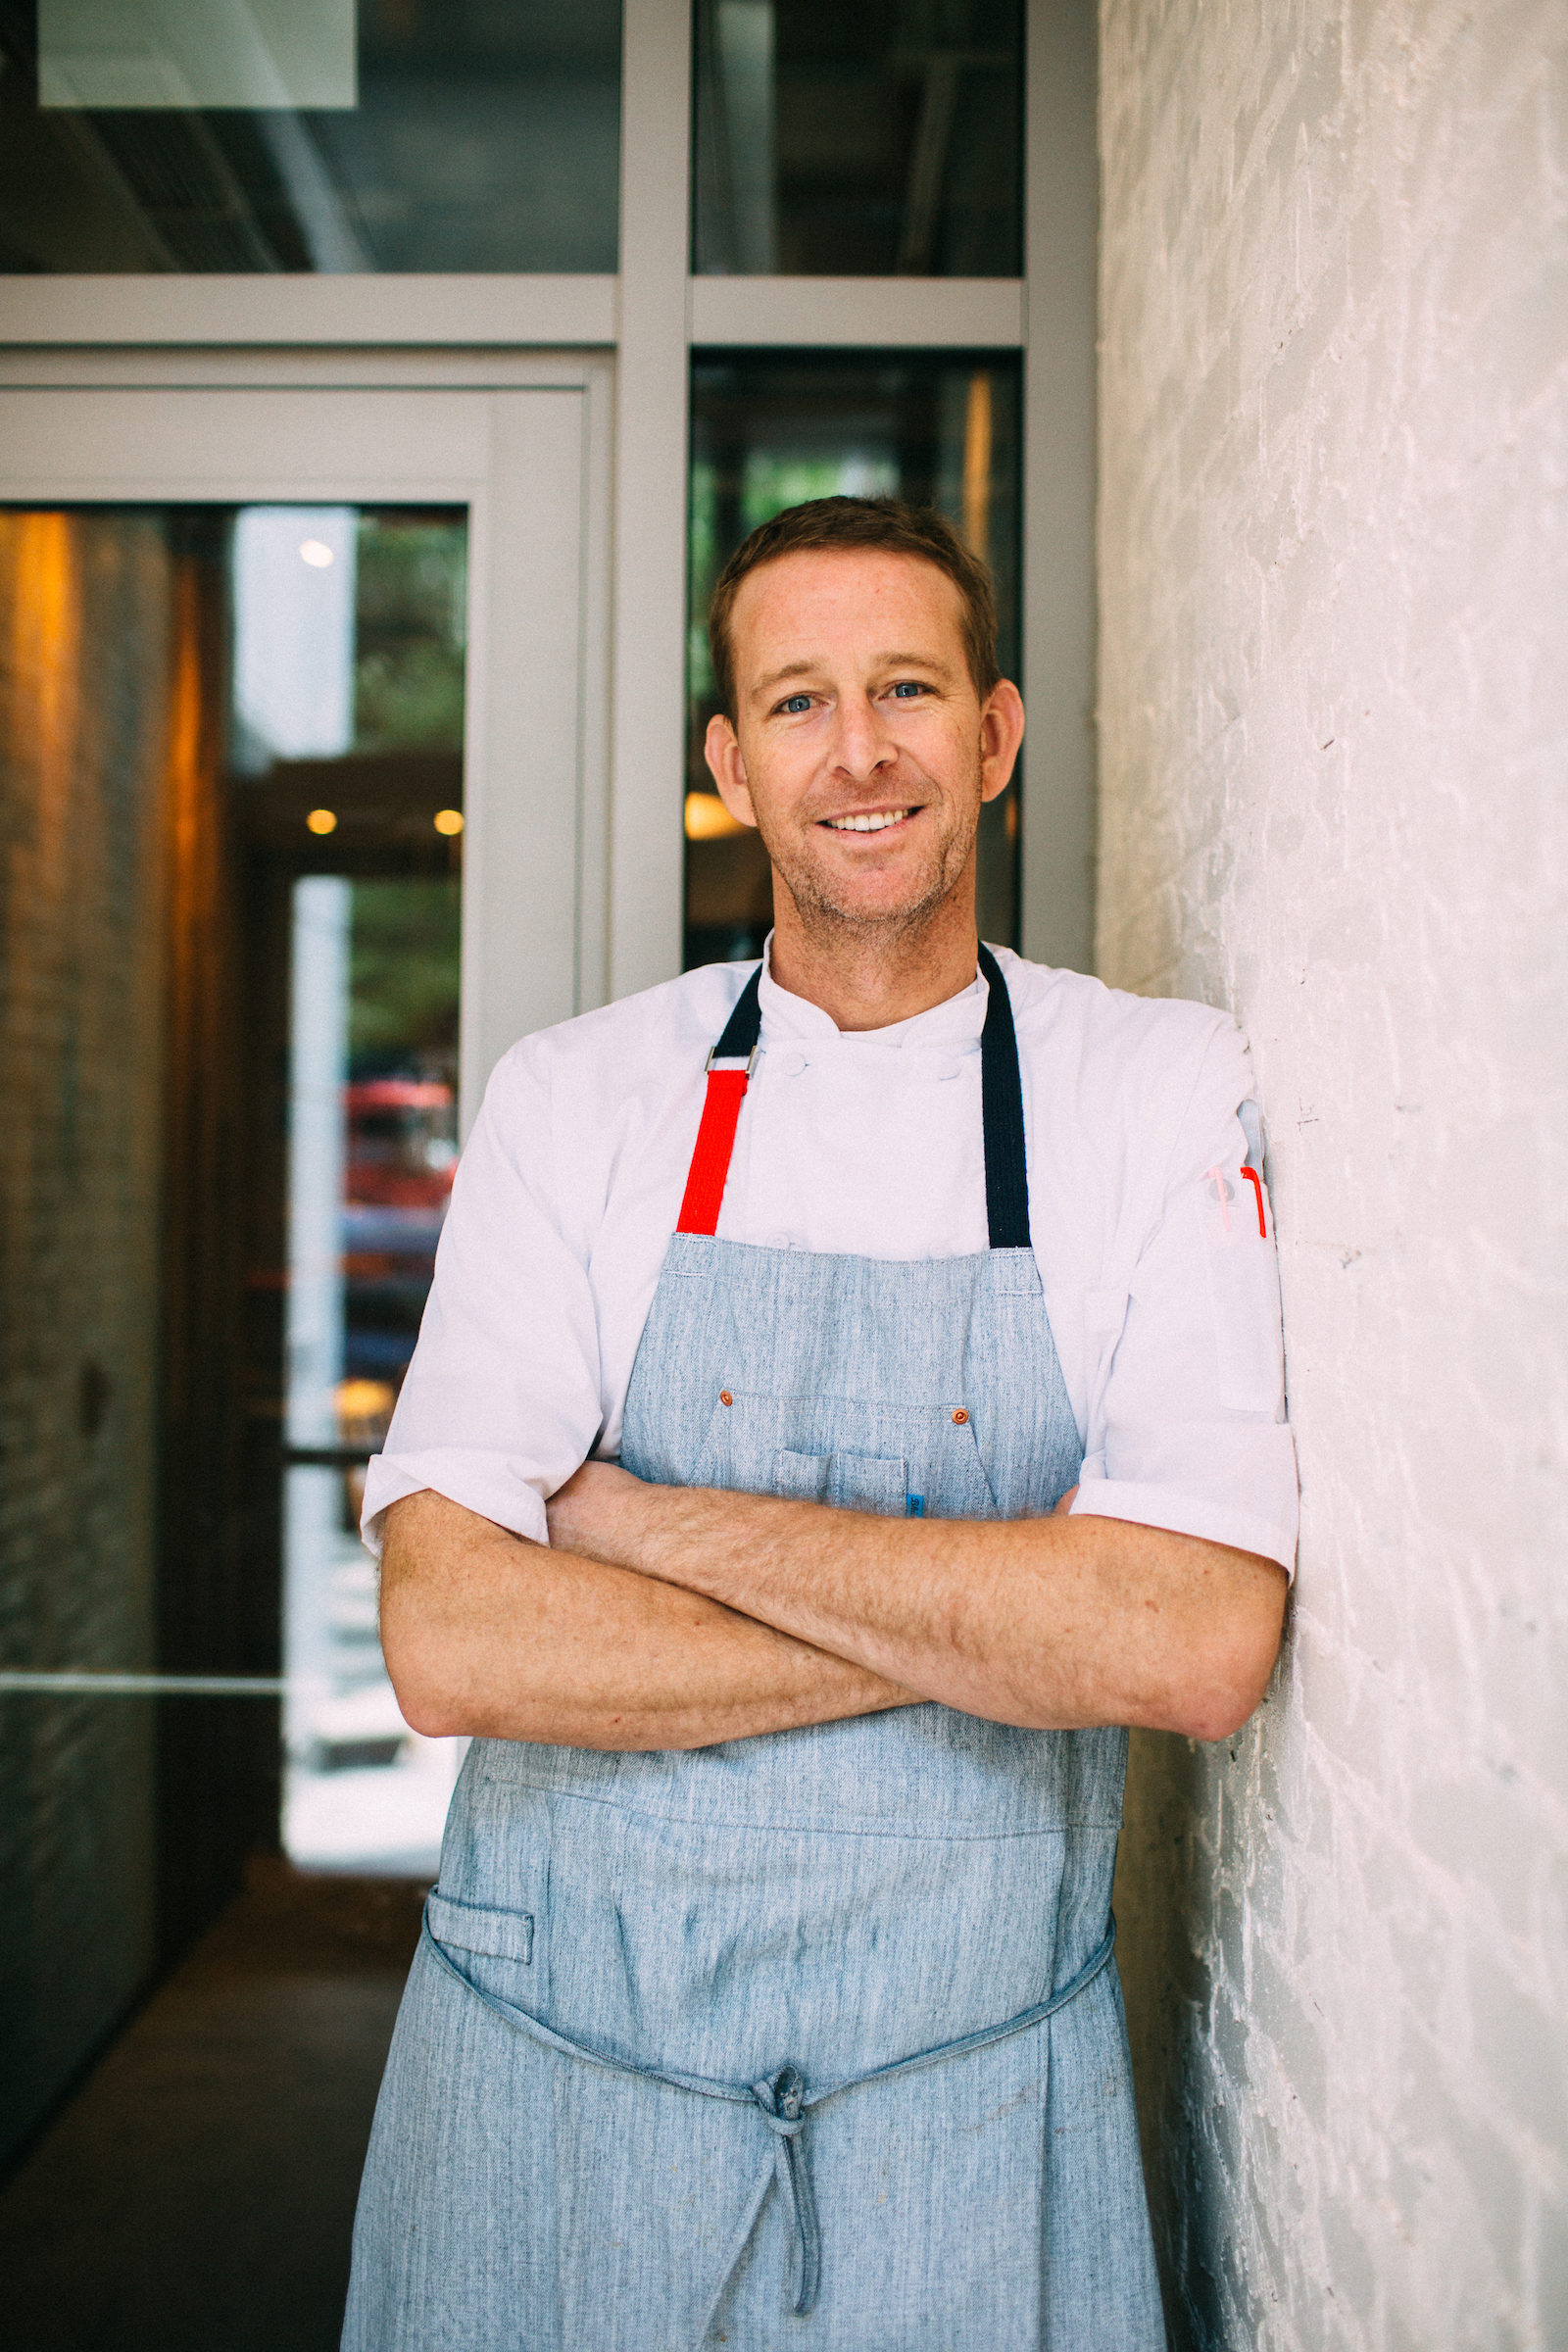 Chef C.J. Jacobson - Executive Chef and Partner of Ema Restaurant - Chicago  - Food for Your Body, Mind, and Spirit